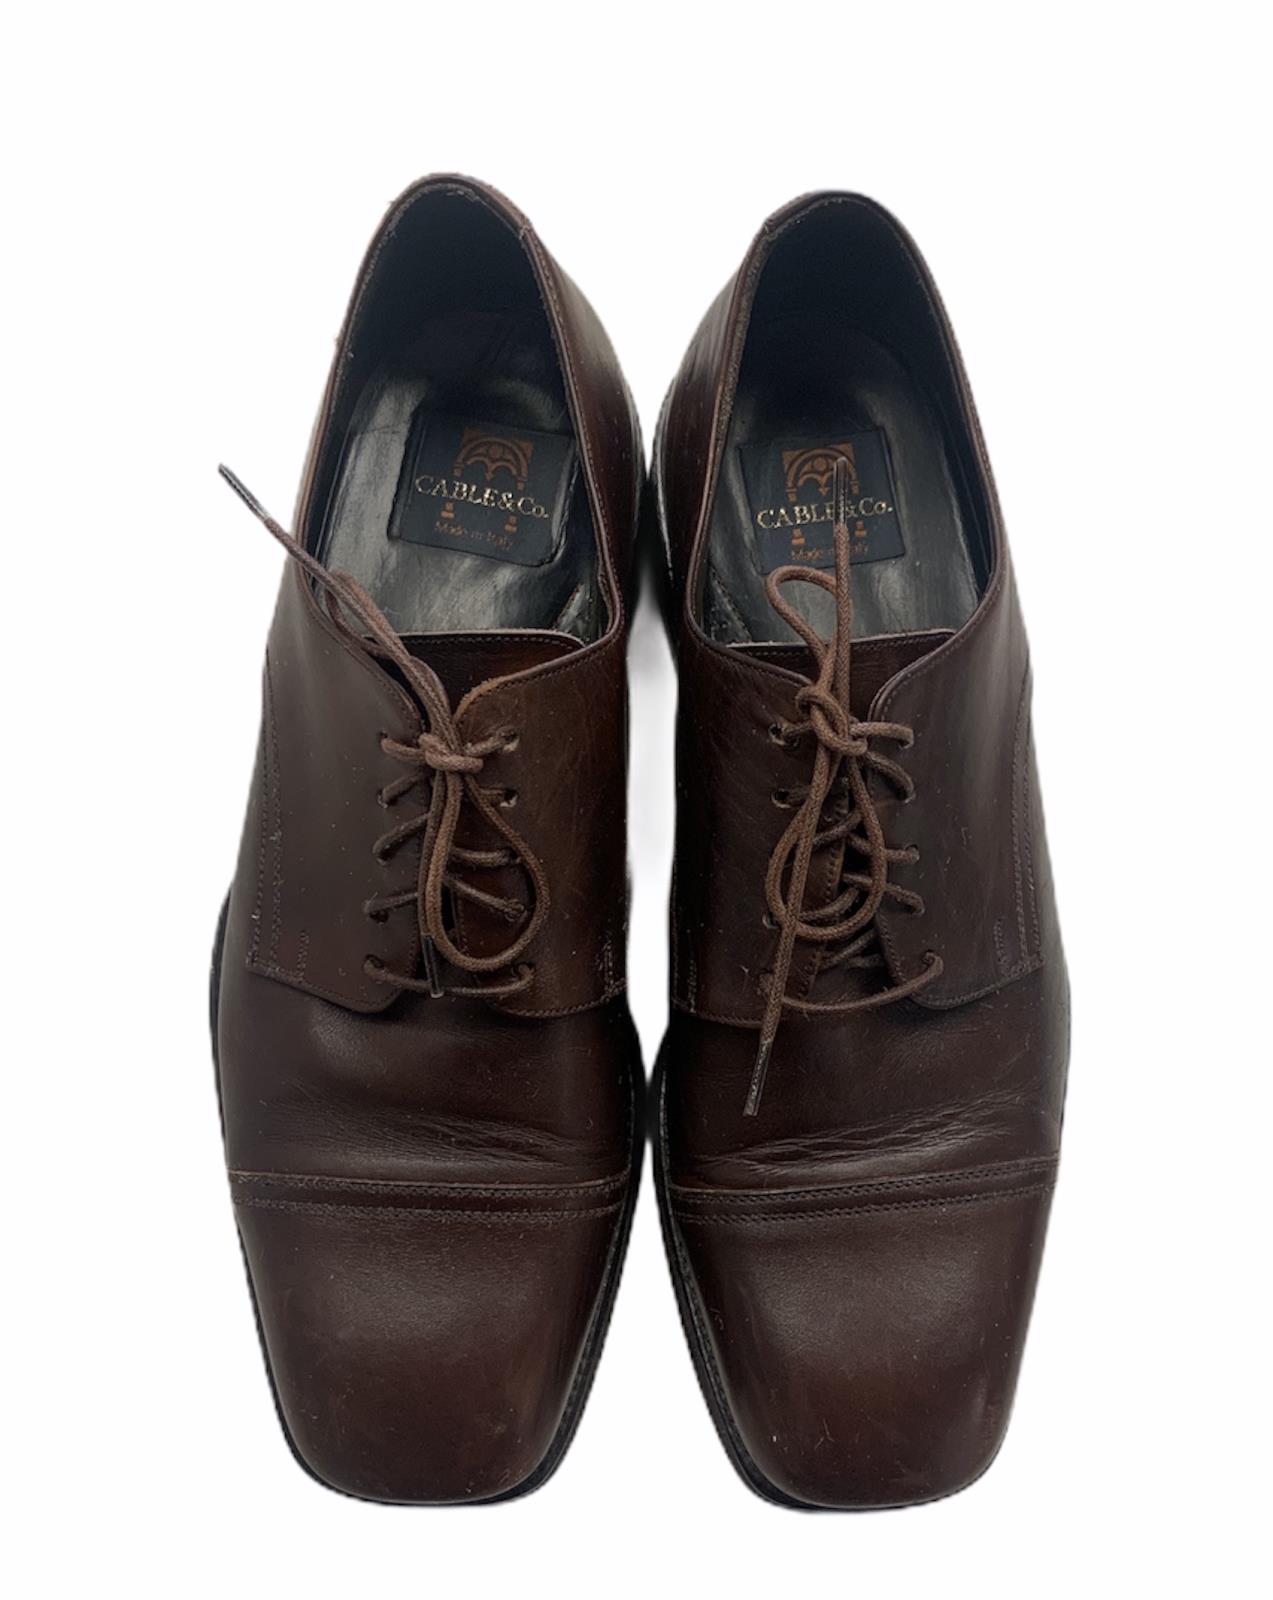 Cable & Co Oxfords Shoes Lace Up Leather Brown Size 10 D | eBay